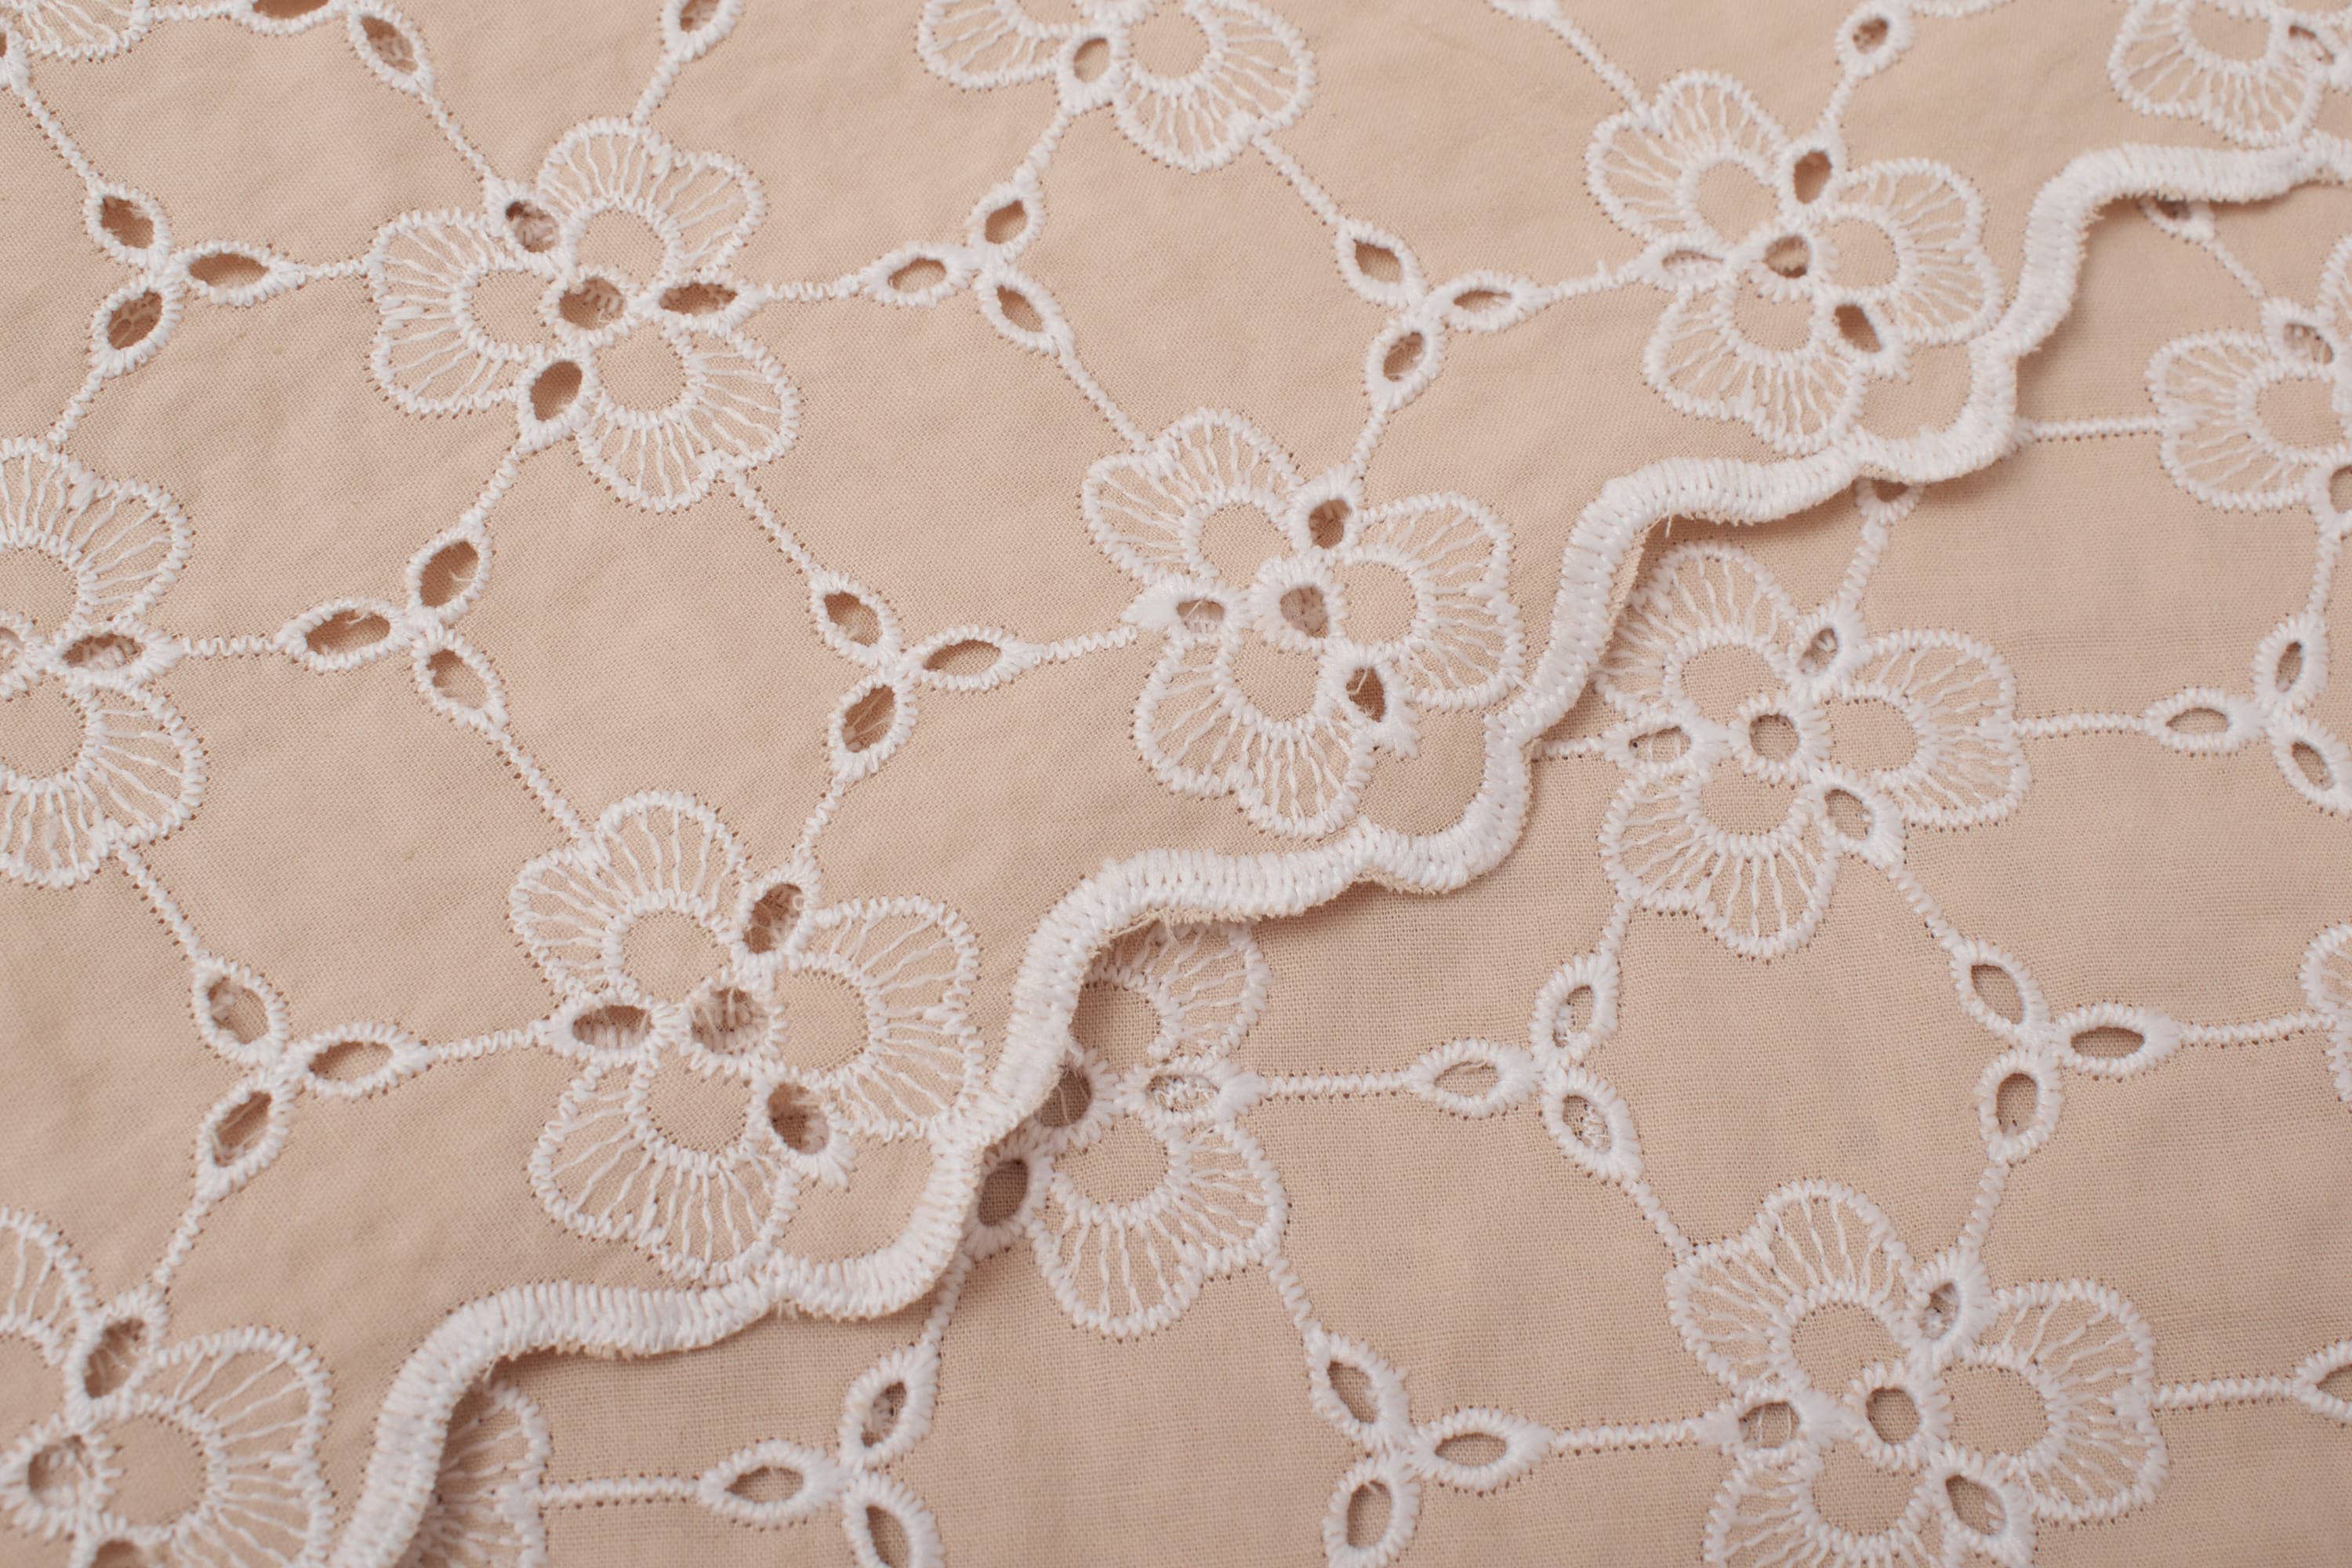 Cotton Fabric Retro Eyelet Flower Cotton Lace Fabric in off White for Boho  Dress, Girl Dress, Tablecloth or Curtains, by 1 Yard 